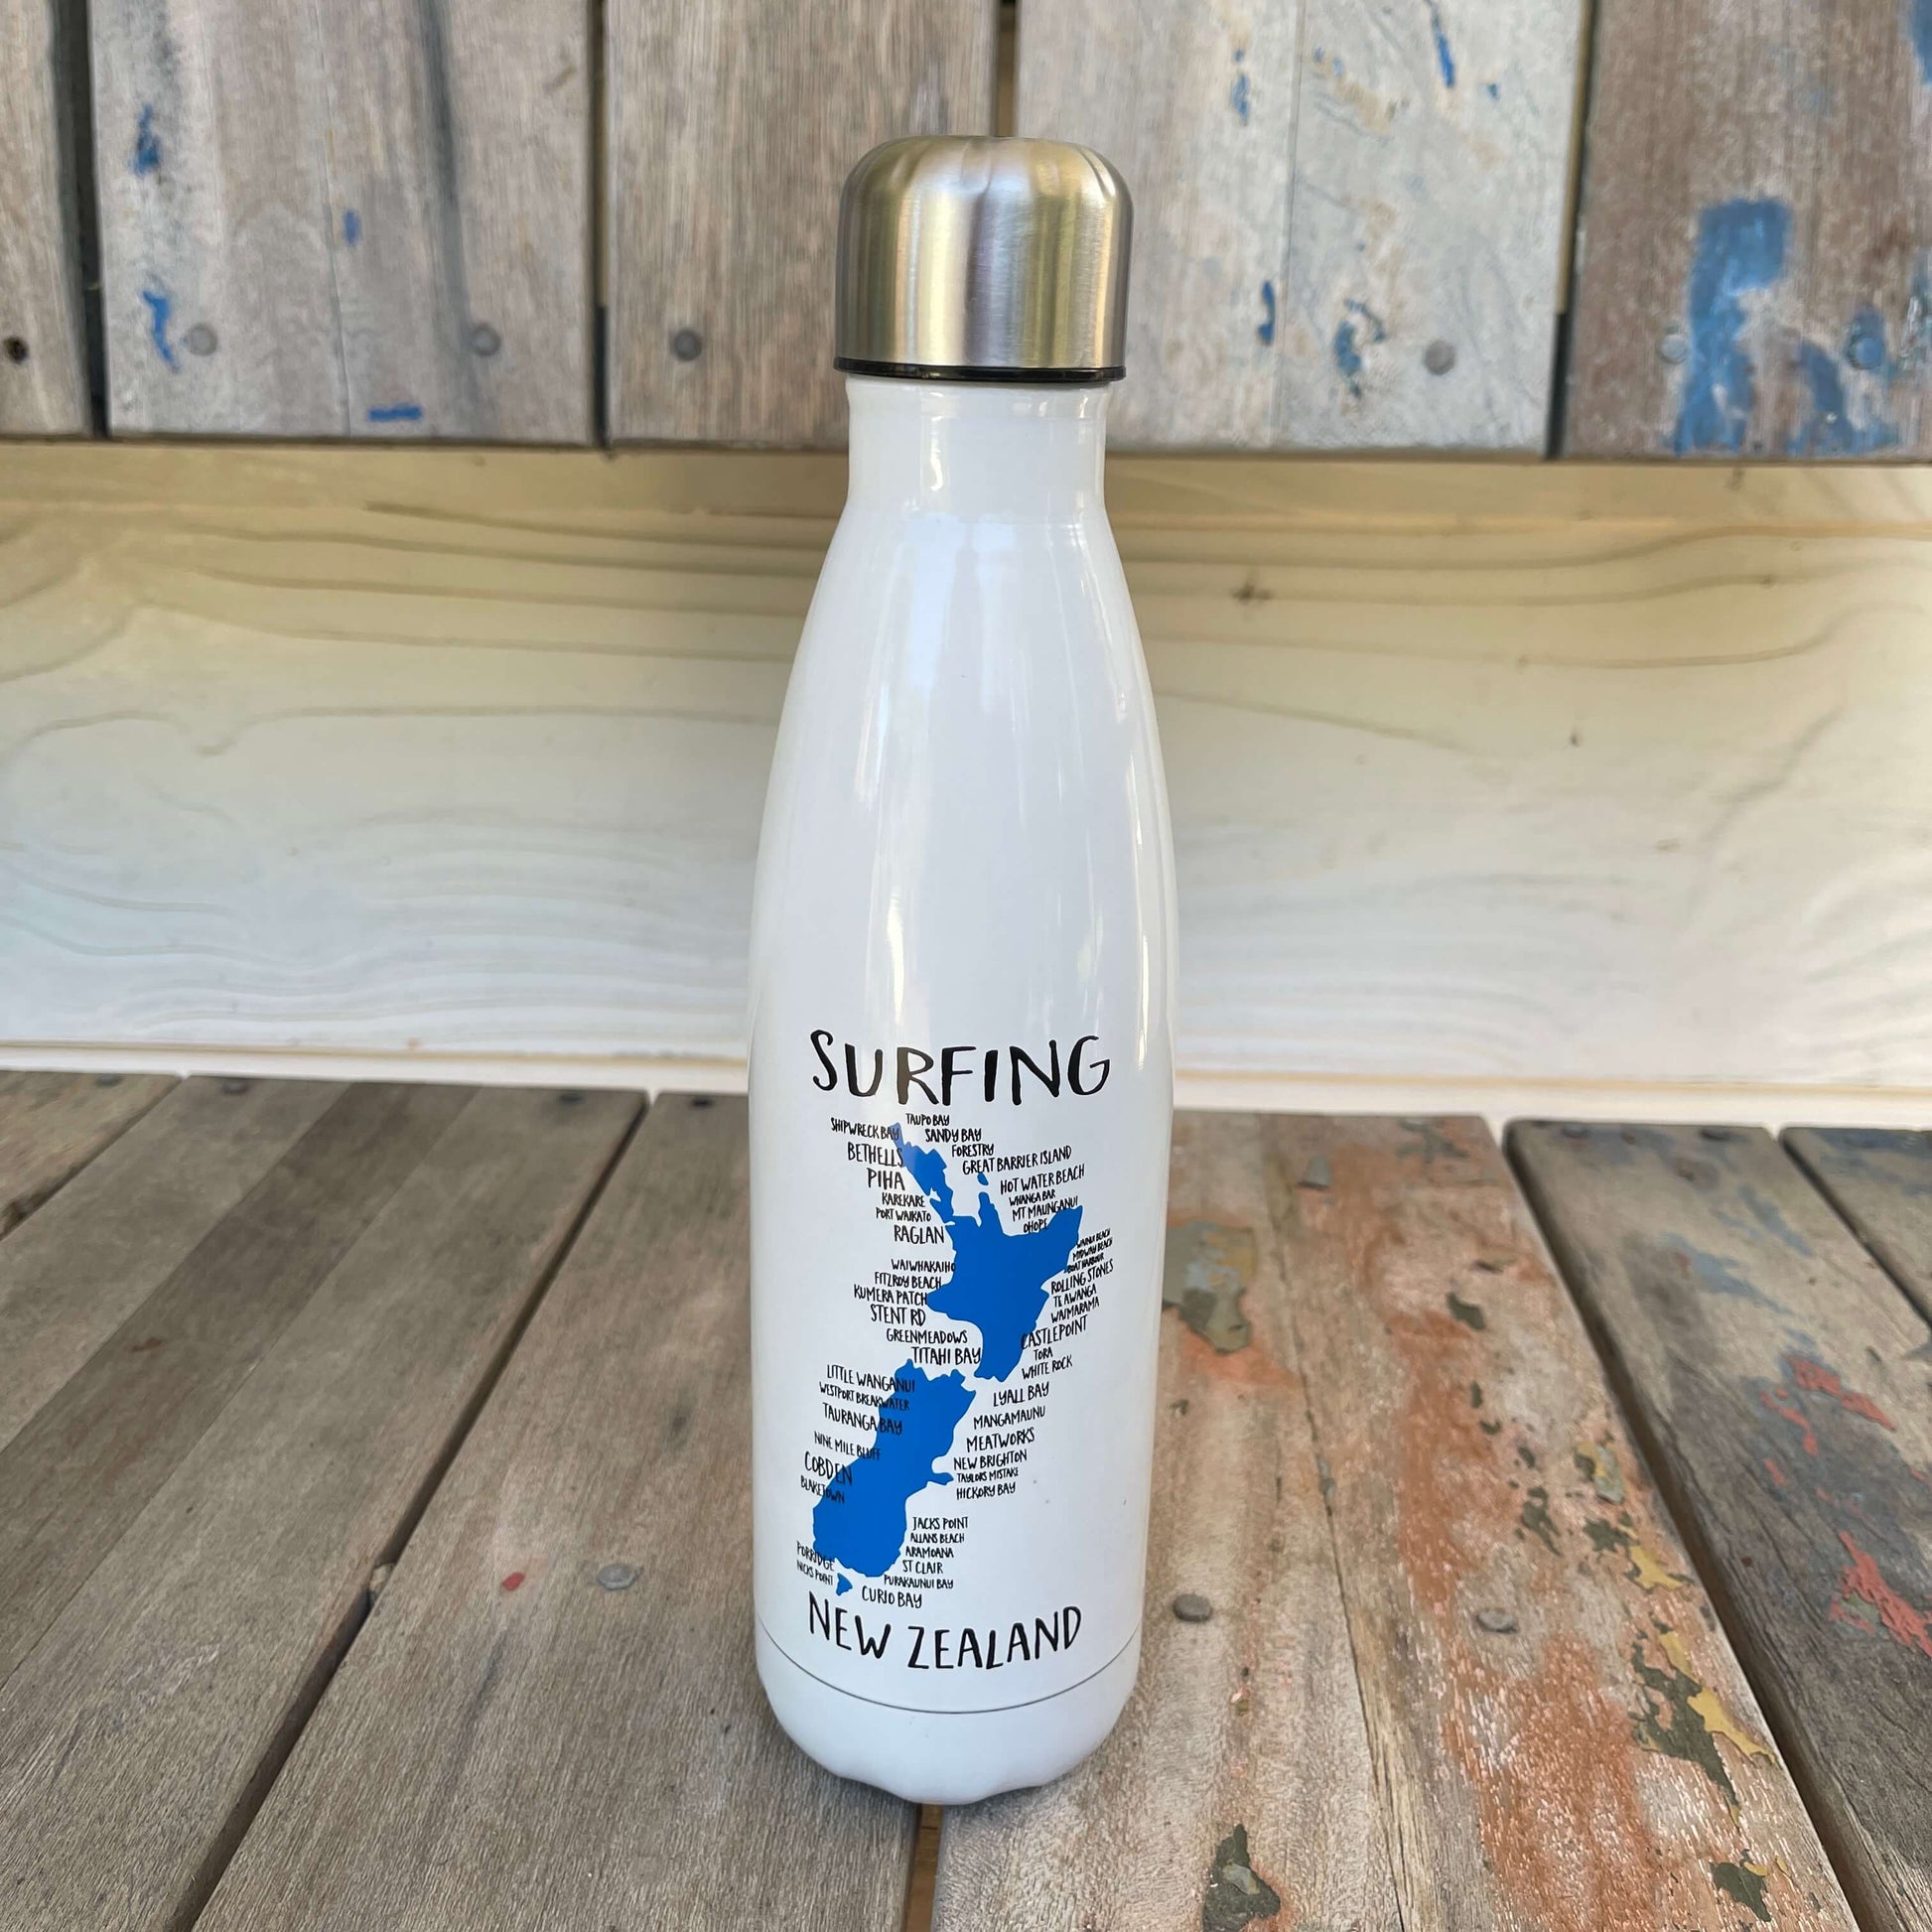 White drink bottle with map of New Zealand featuring surfing hot spots sitting on a wooden bench.